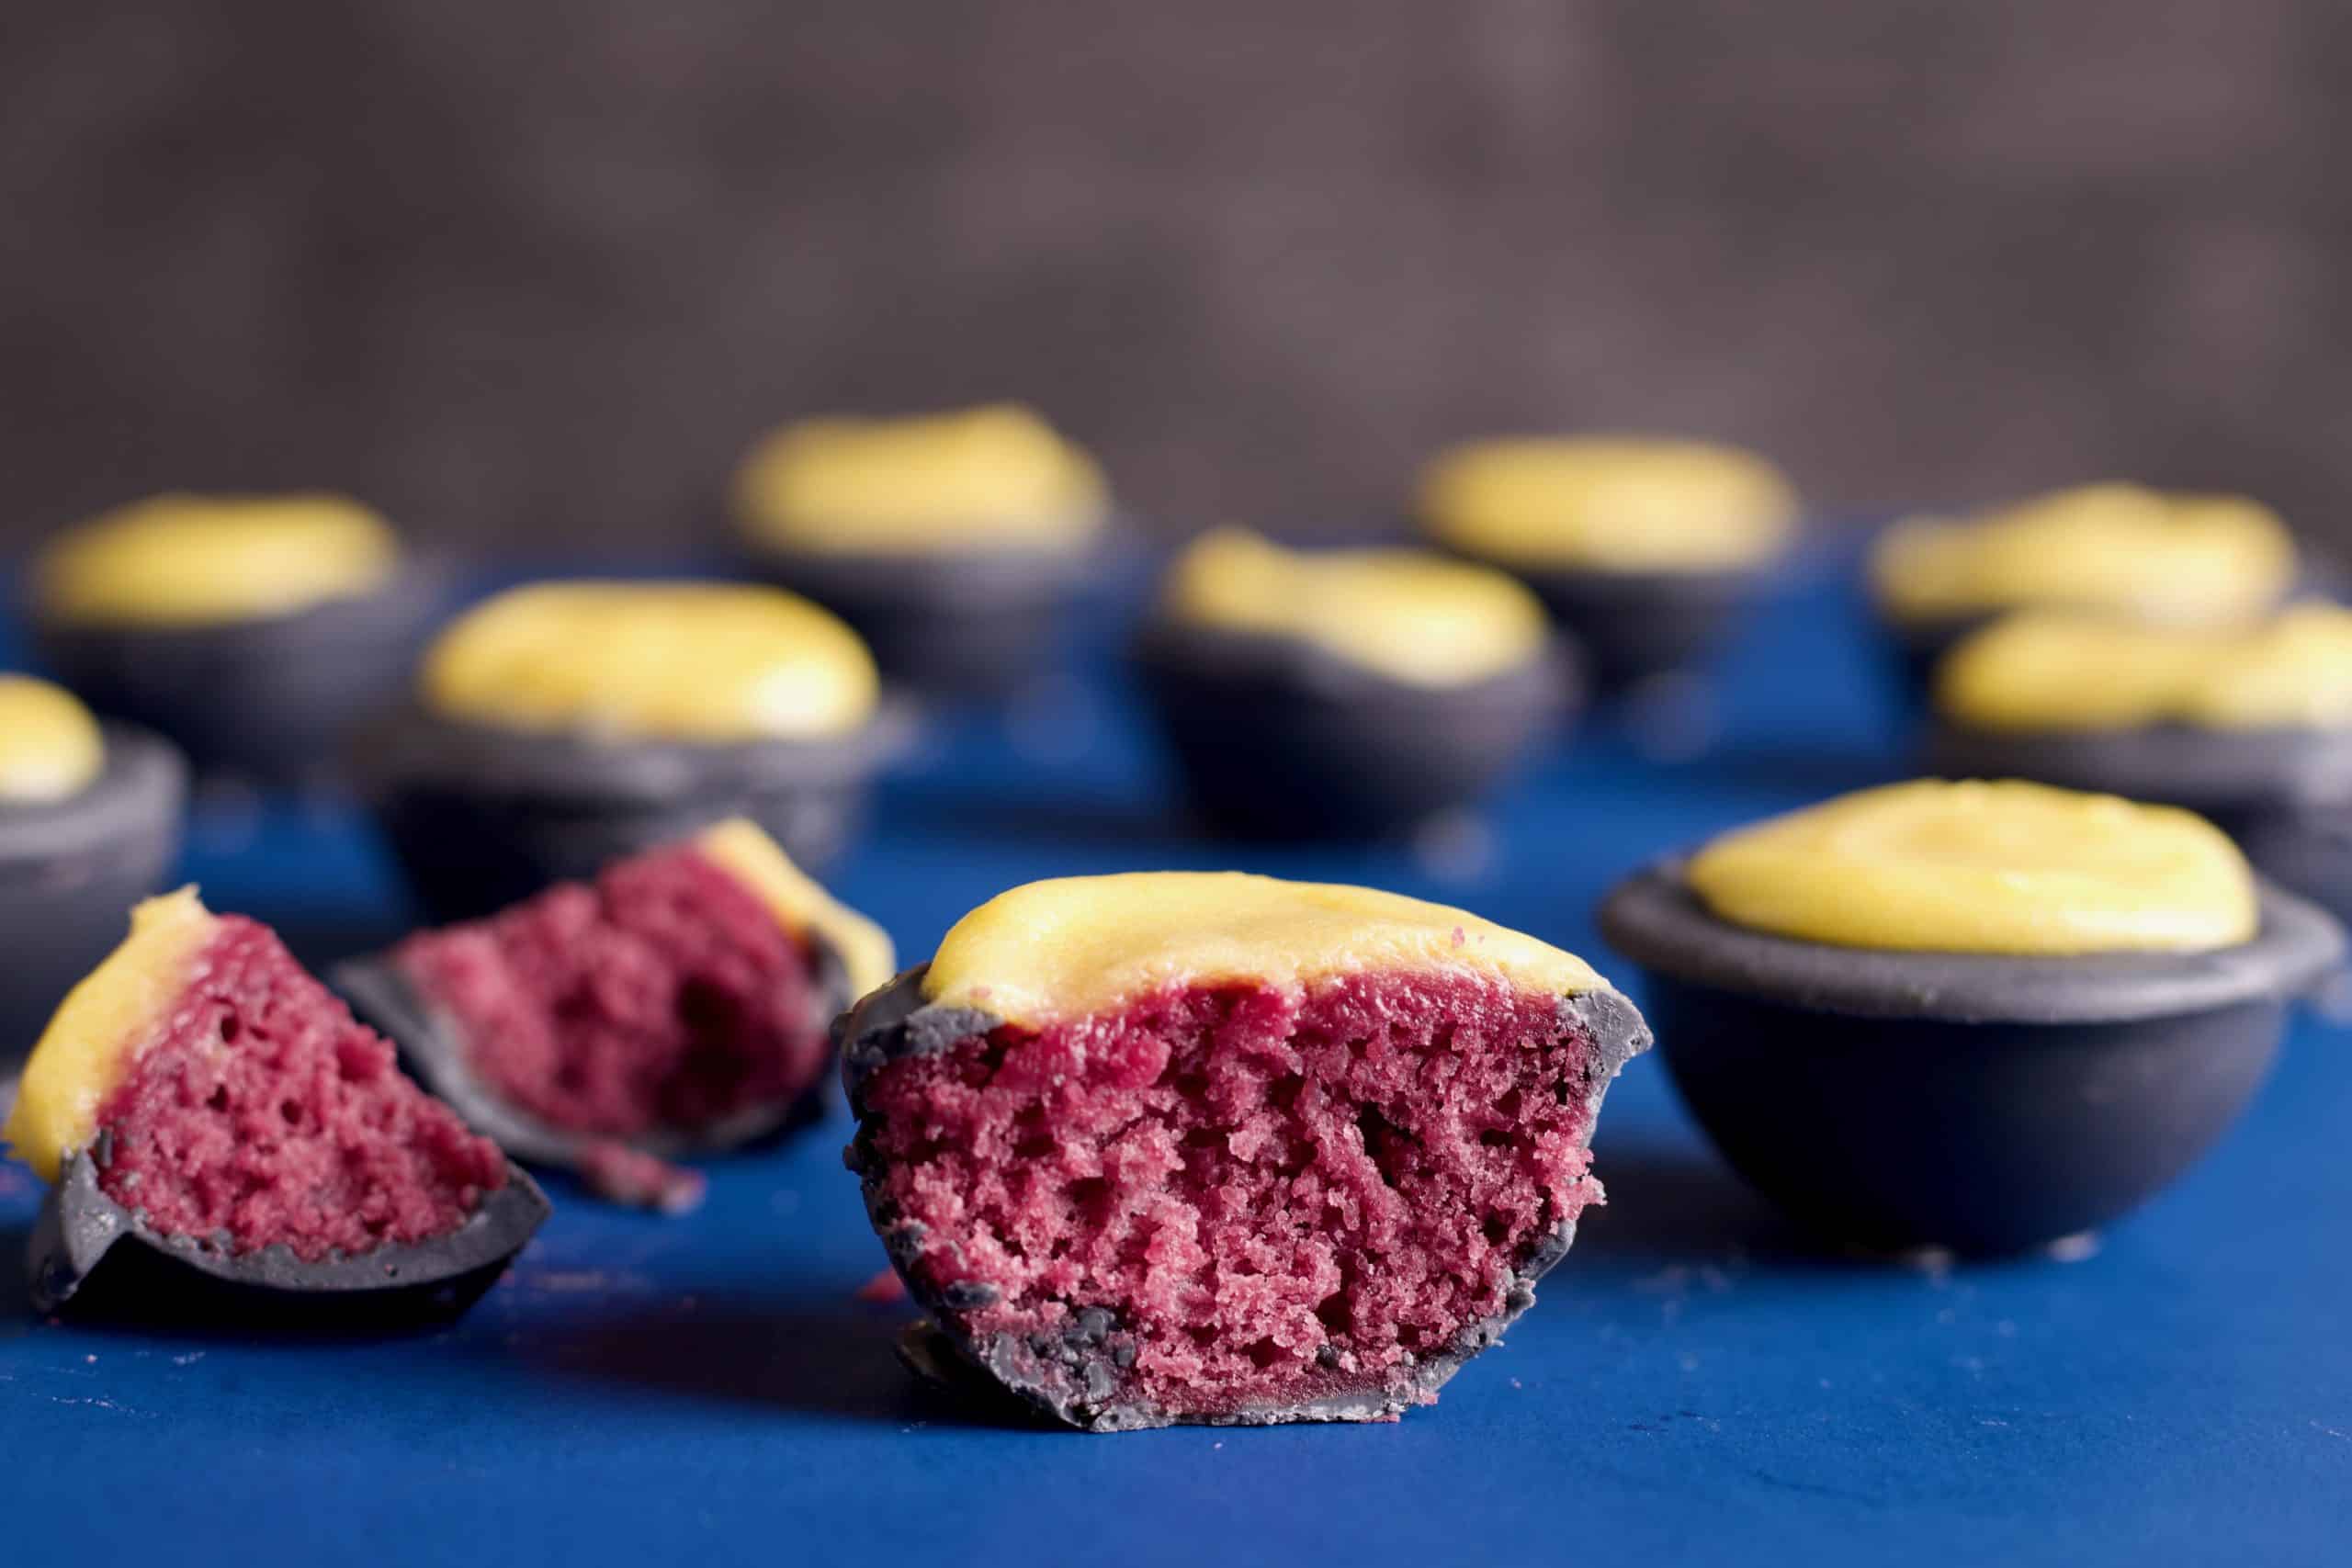 grey coated mini cakes, filled with blackberry cake and topped with lemon curd